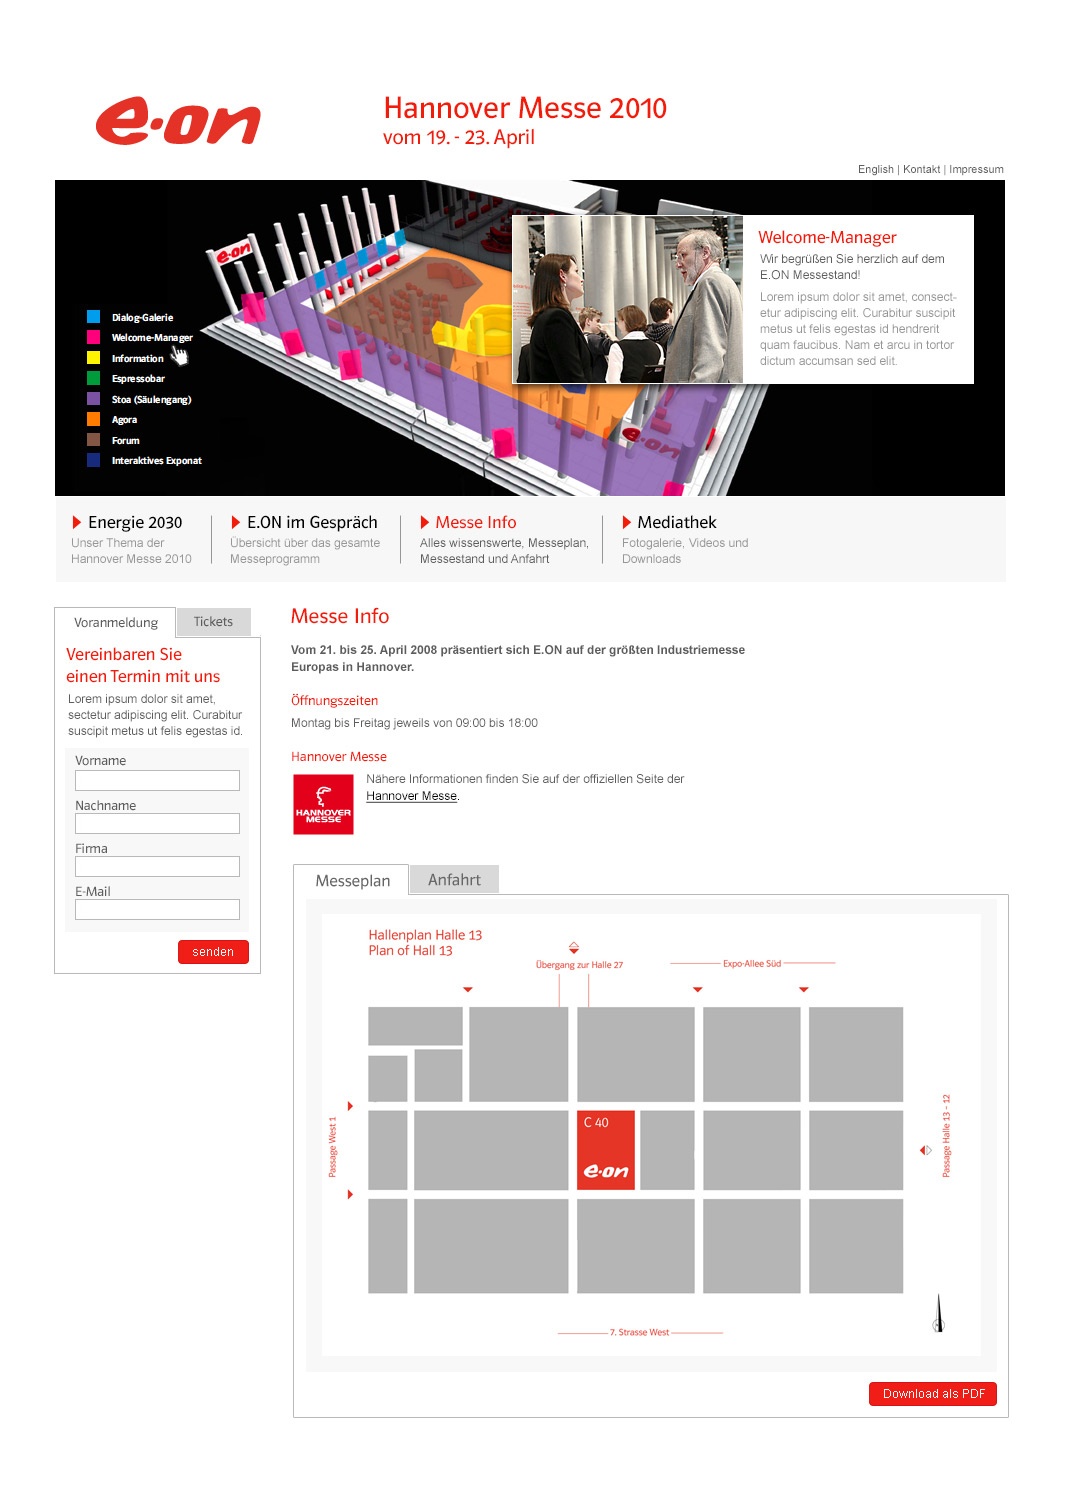 E.ON Microsite Hannover Messe 2010 Stefie Plendl